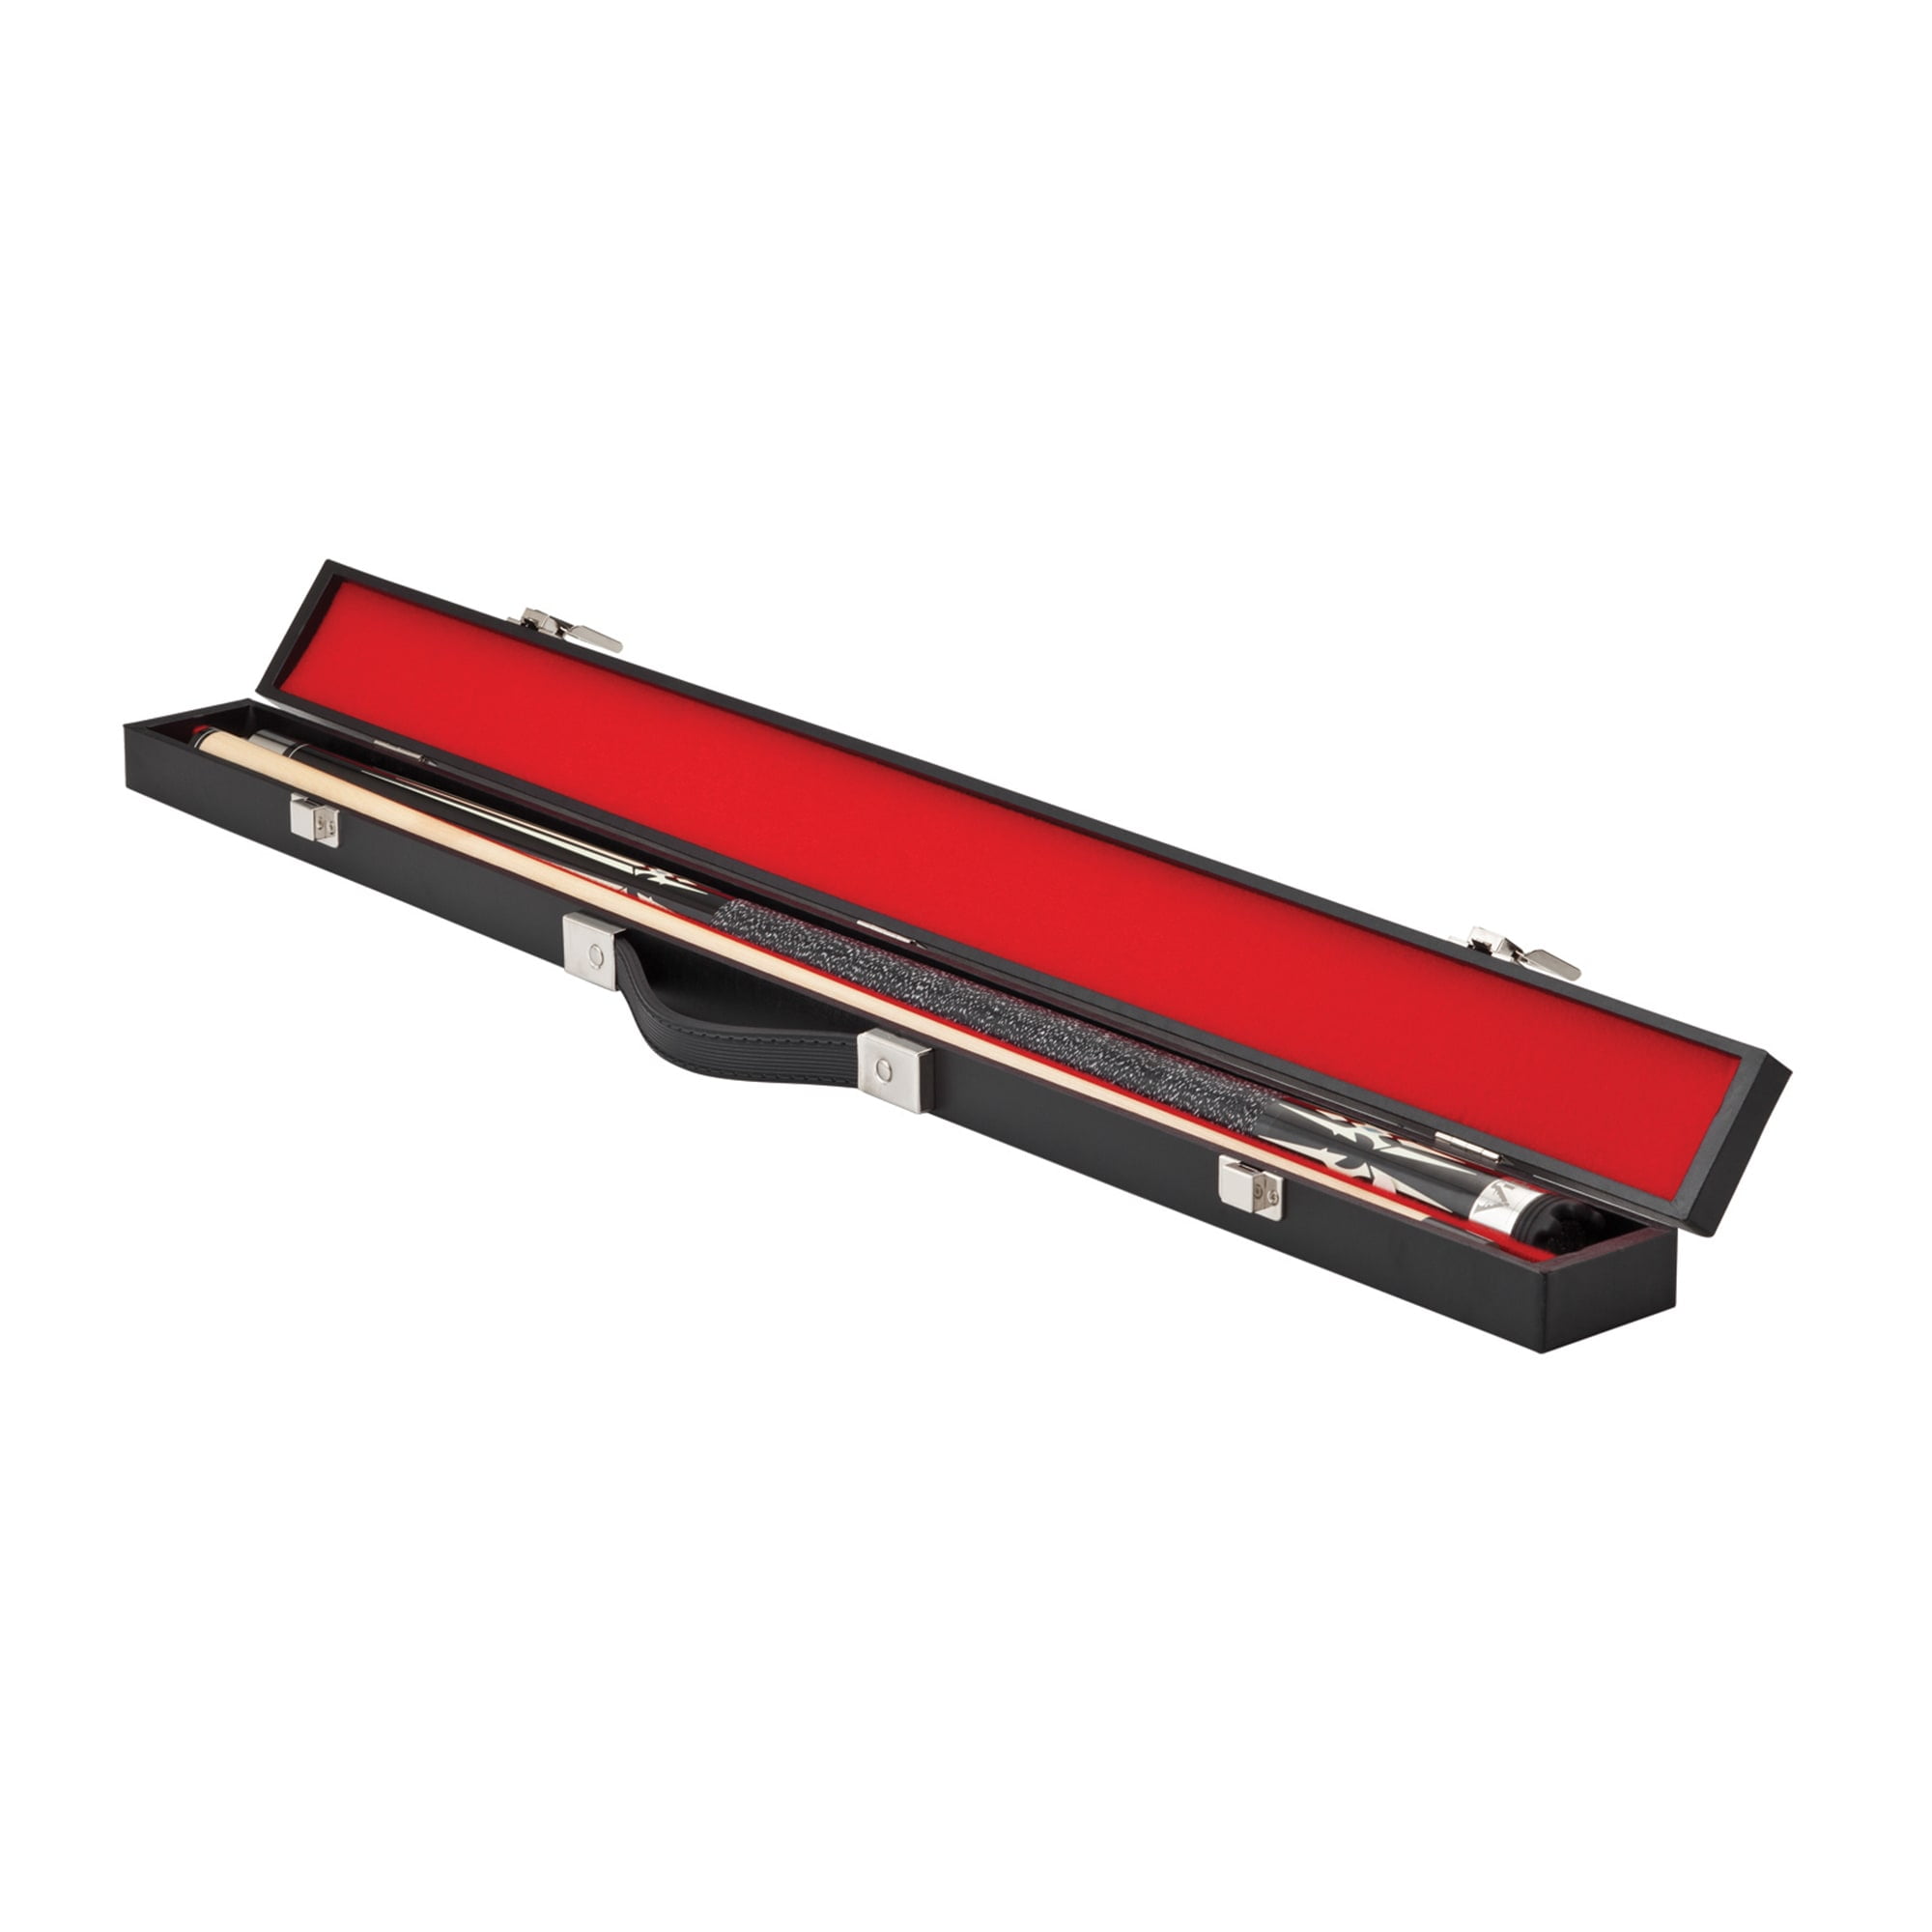 Casemaster Deluxe Hard-Sided Billiard/Pool Cue Case, Fits 1 